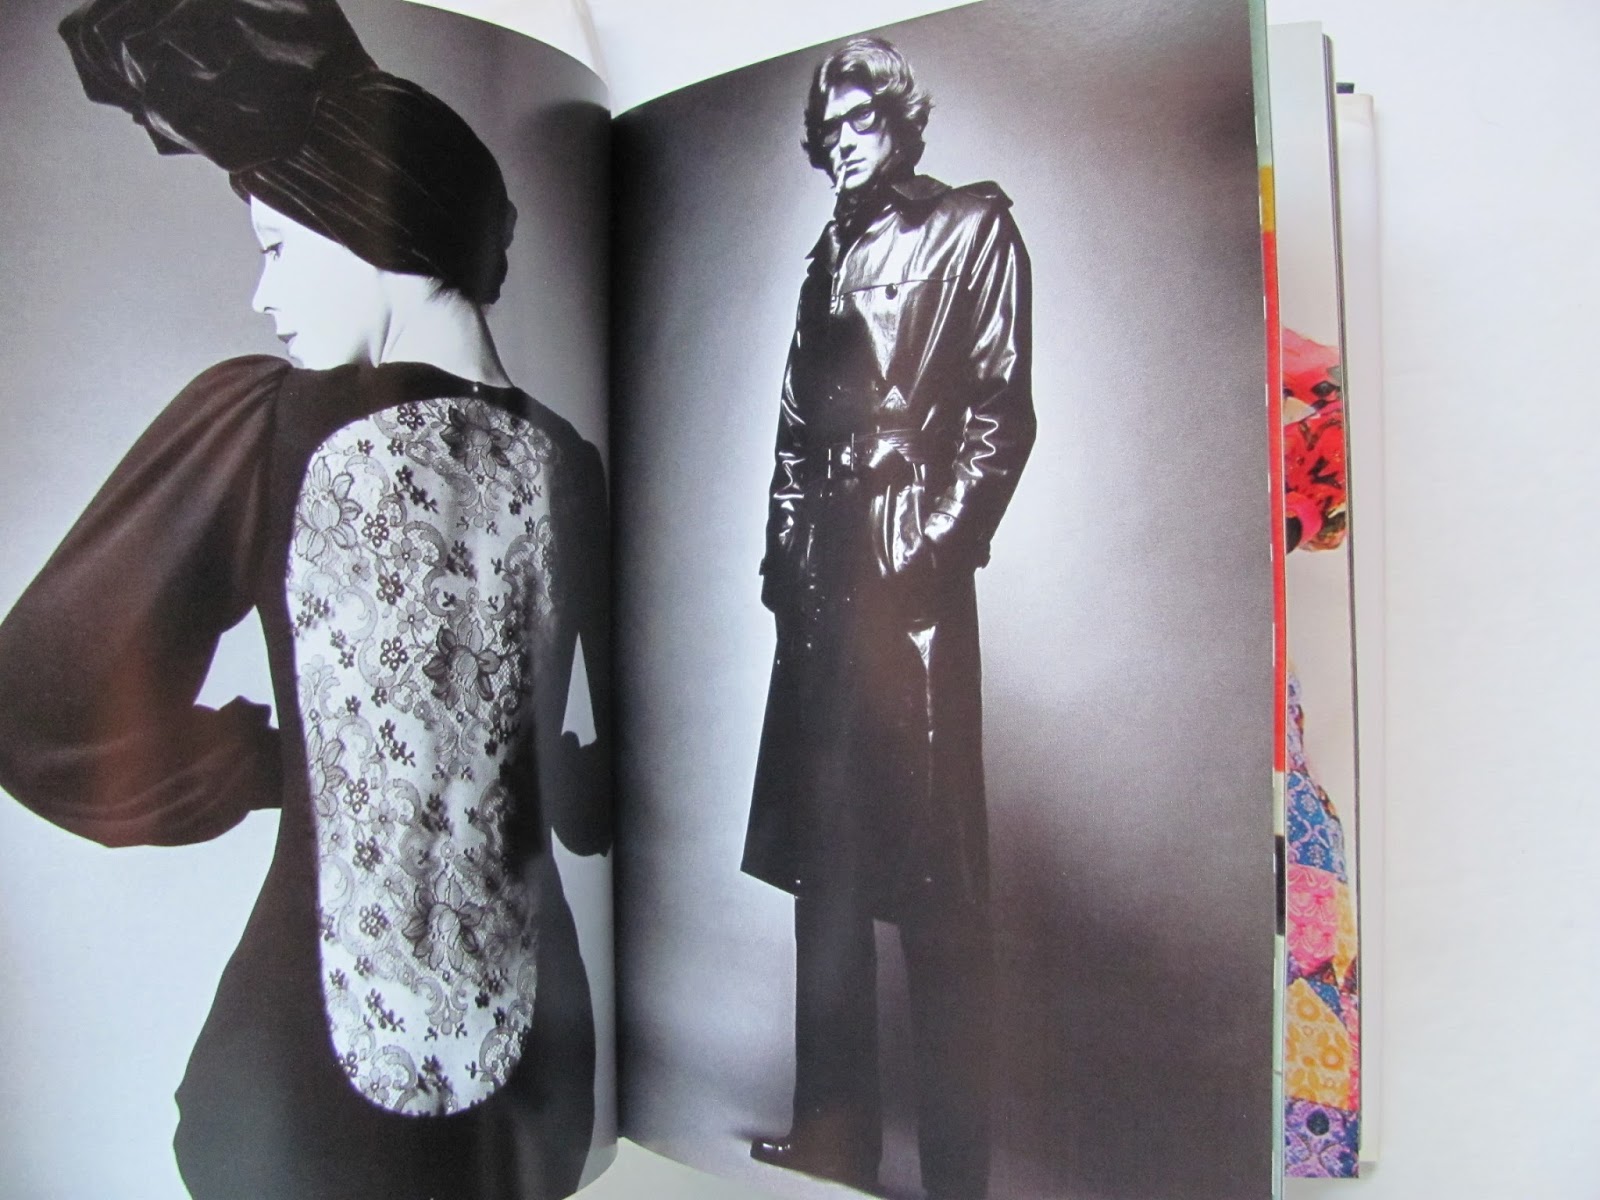 catwalk collection books